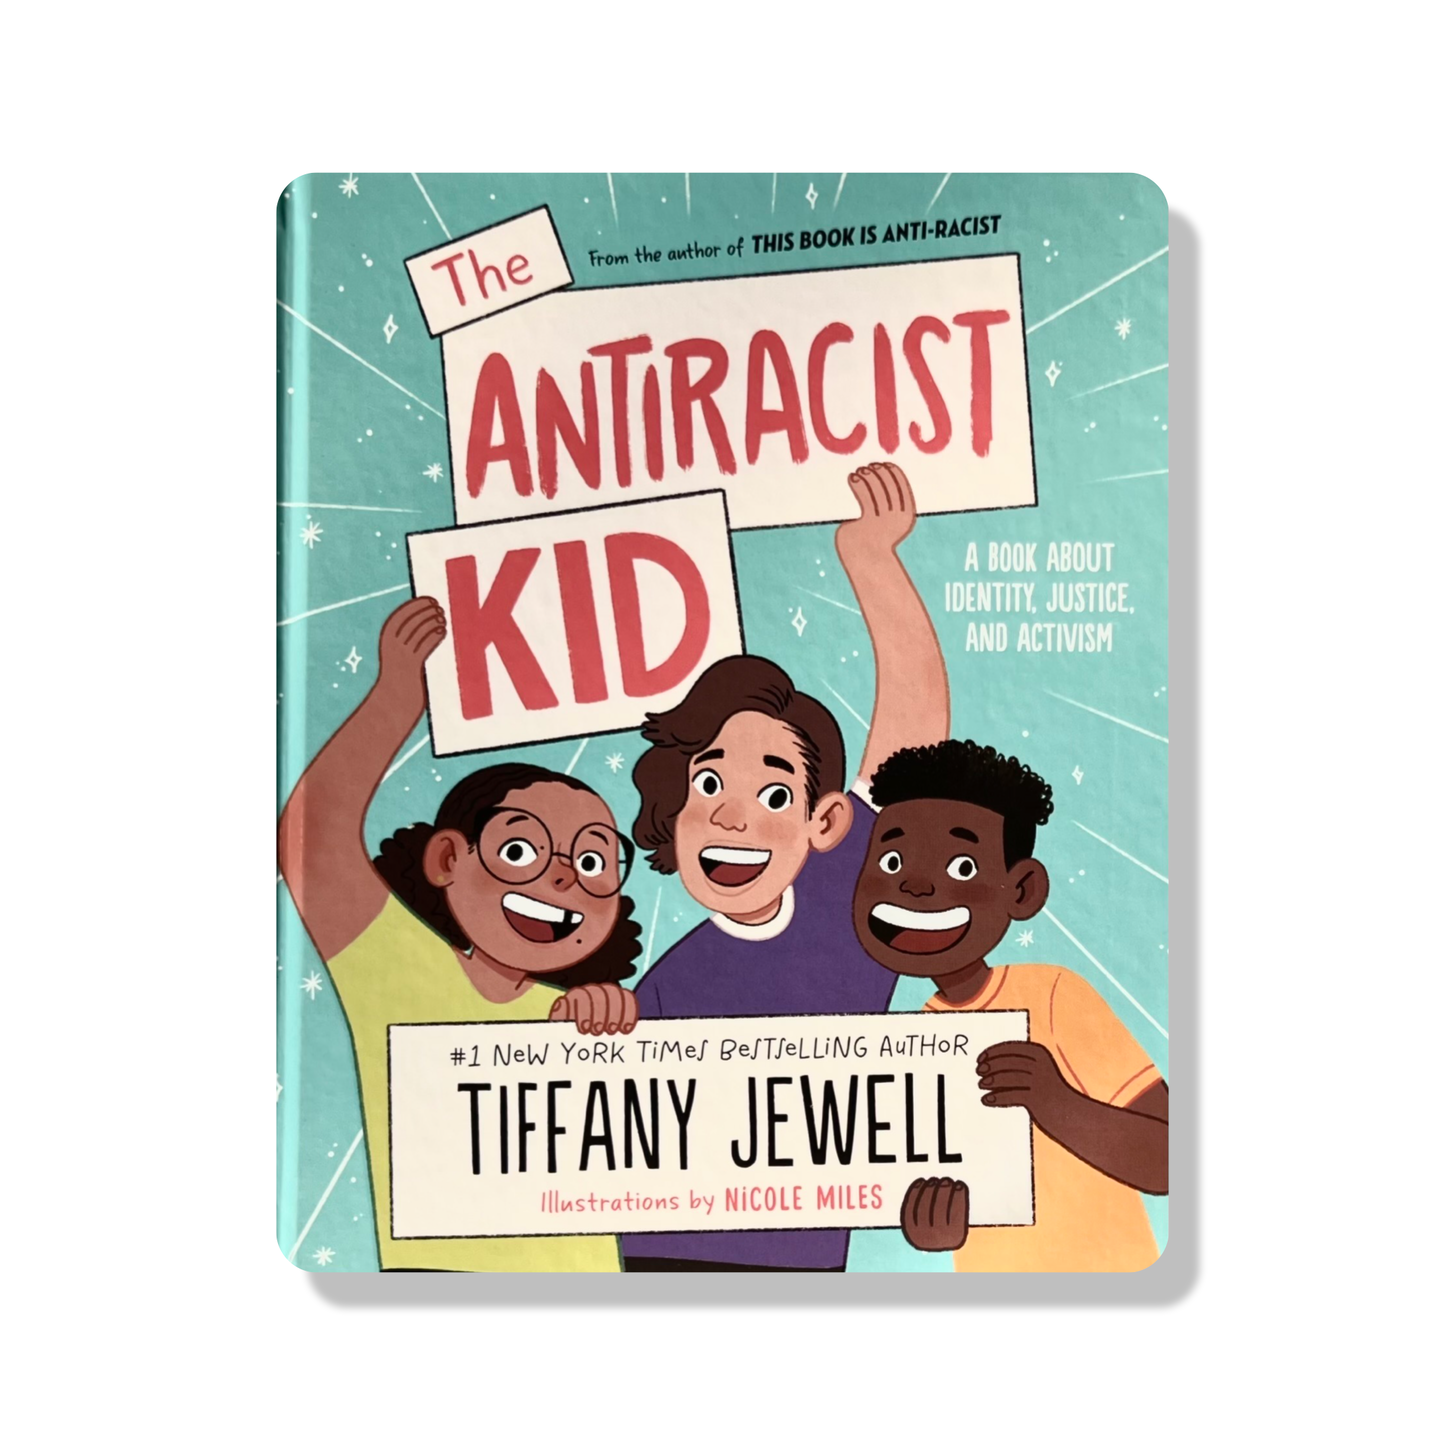 The Antiracist Kid: A Book about Identity, Justice, and Activism